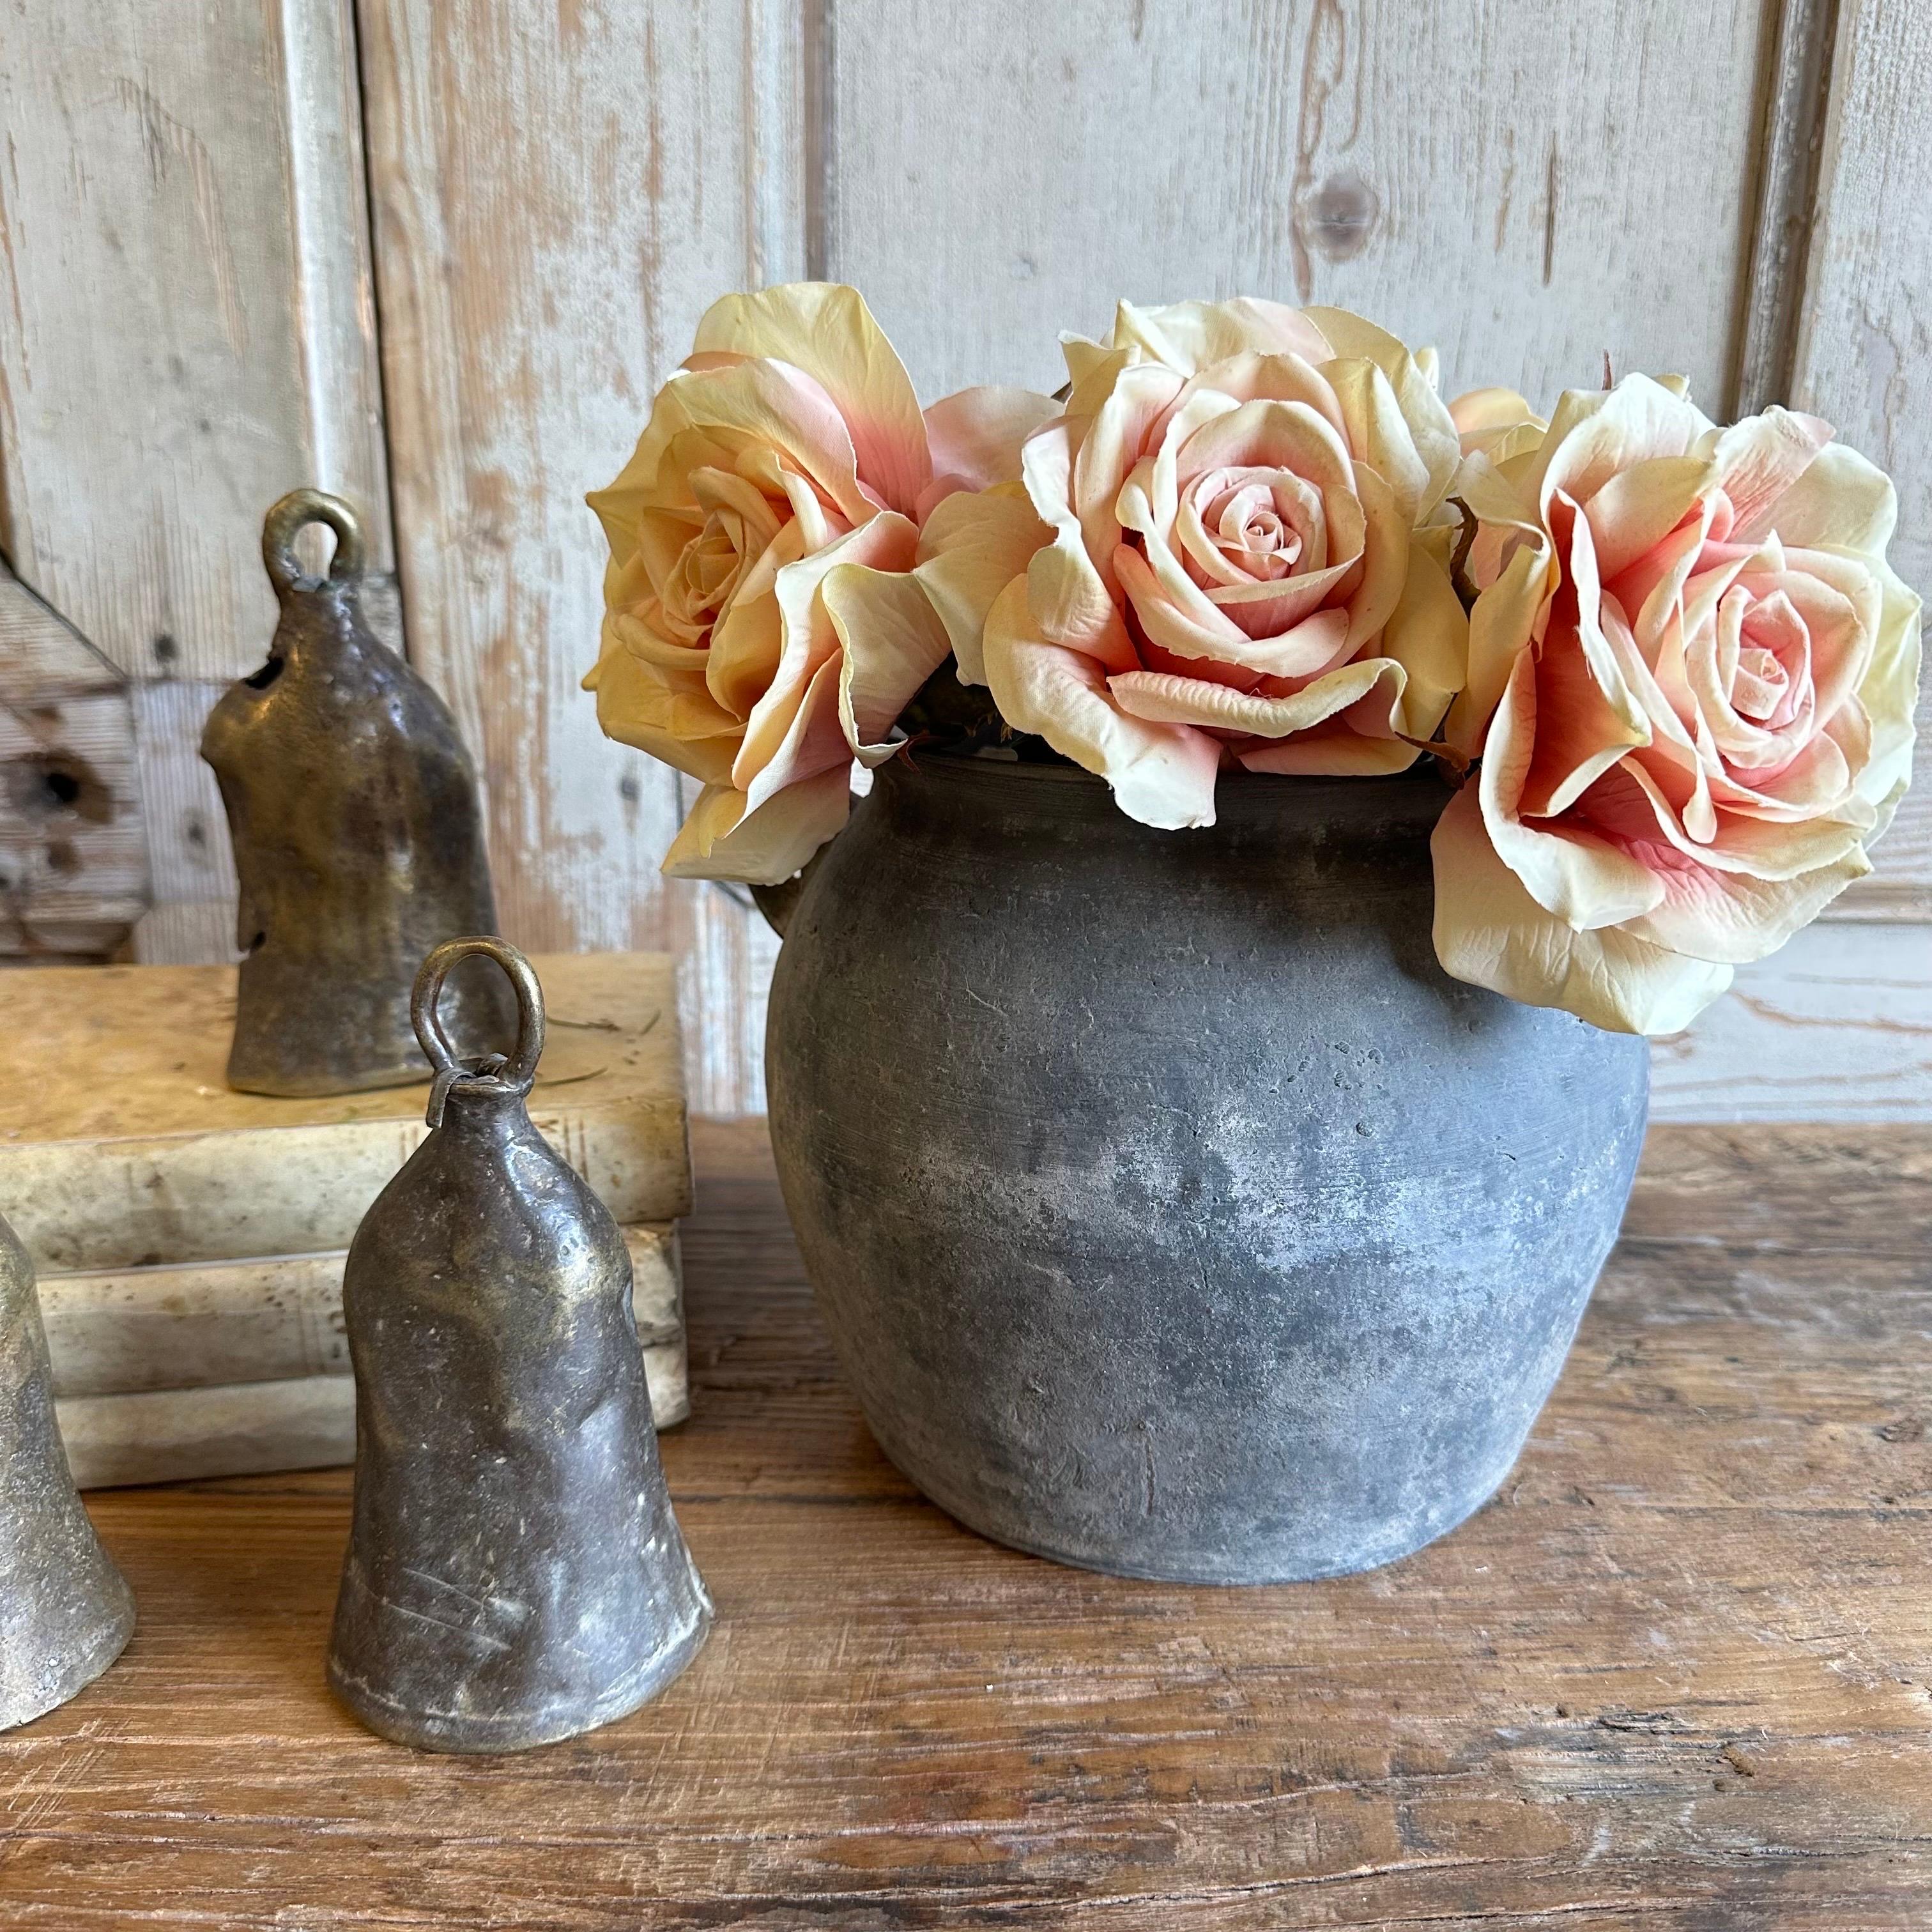 Vintage matte oil pots pottery rich in character, this vintage oil pot adds just the right amount of texture + warmth where you need it. Stunning matte finish with dark gray and light gray accents, with a washed antique look. Each piece is uniquely